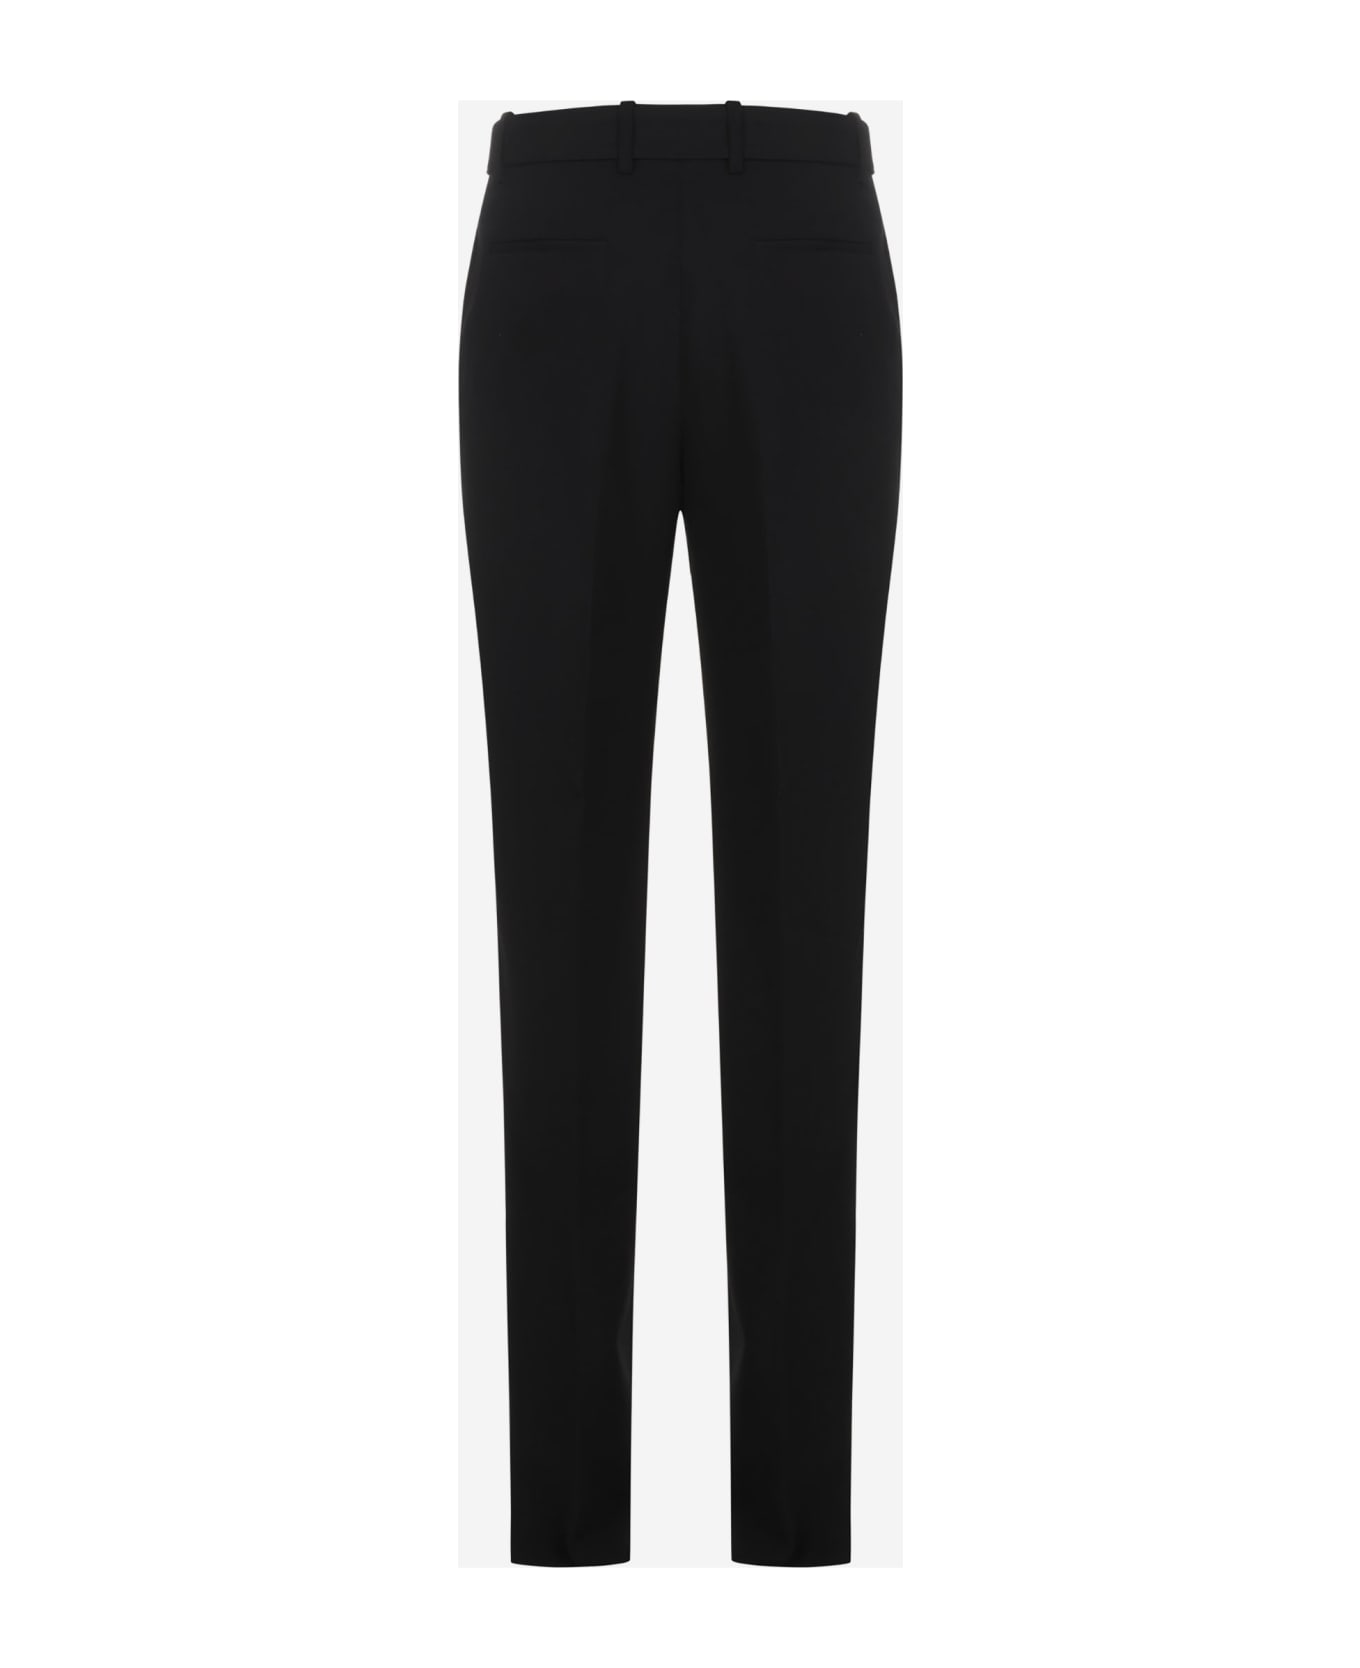 Off-White Trousers - Black